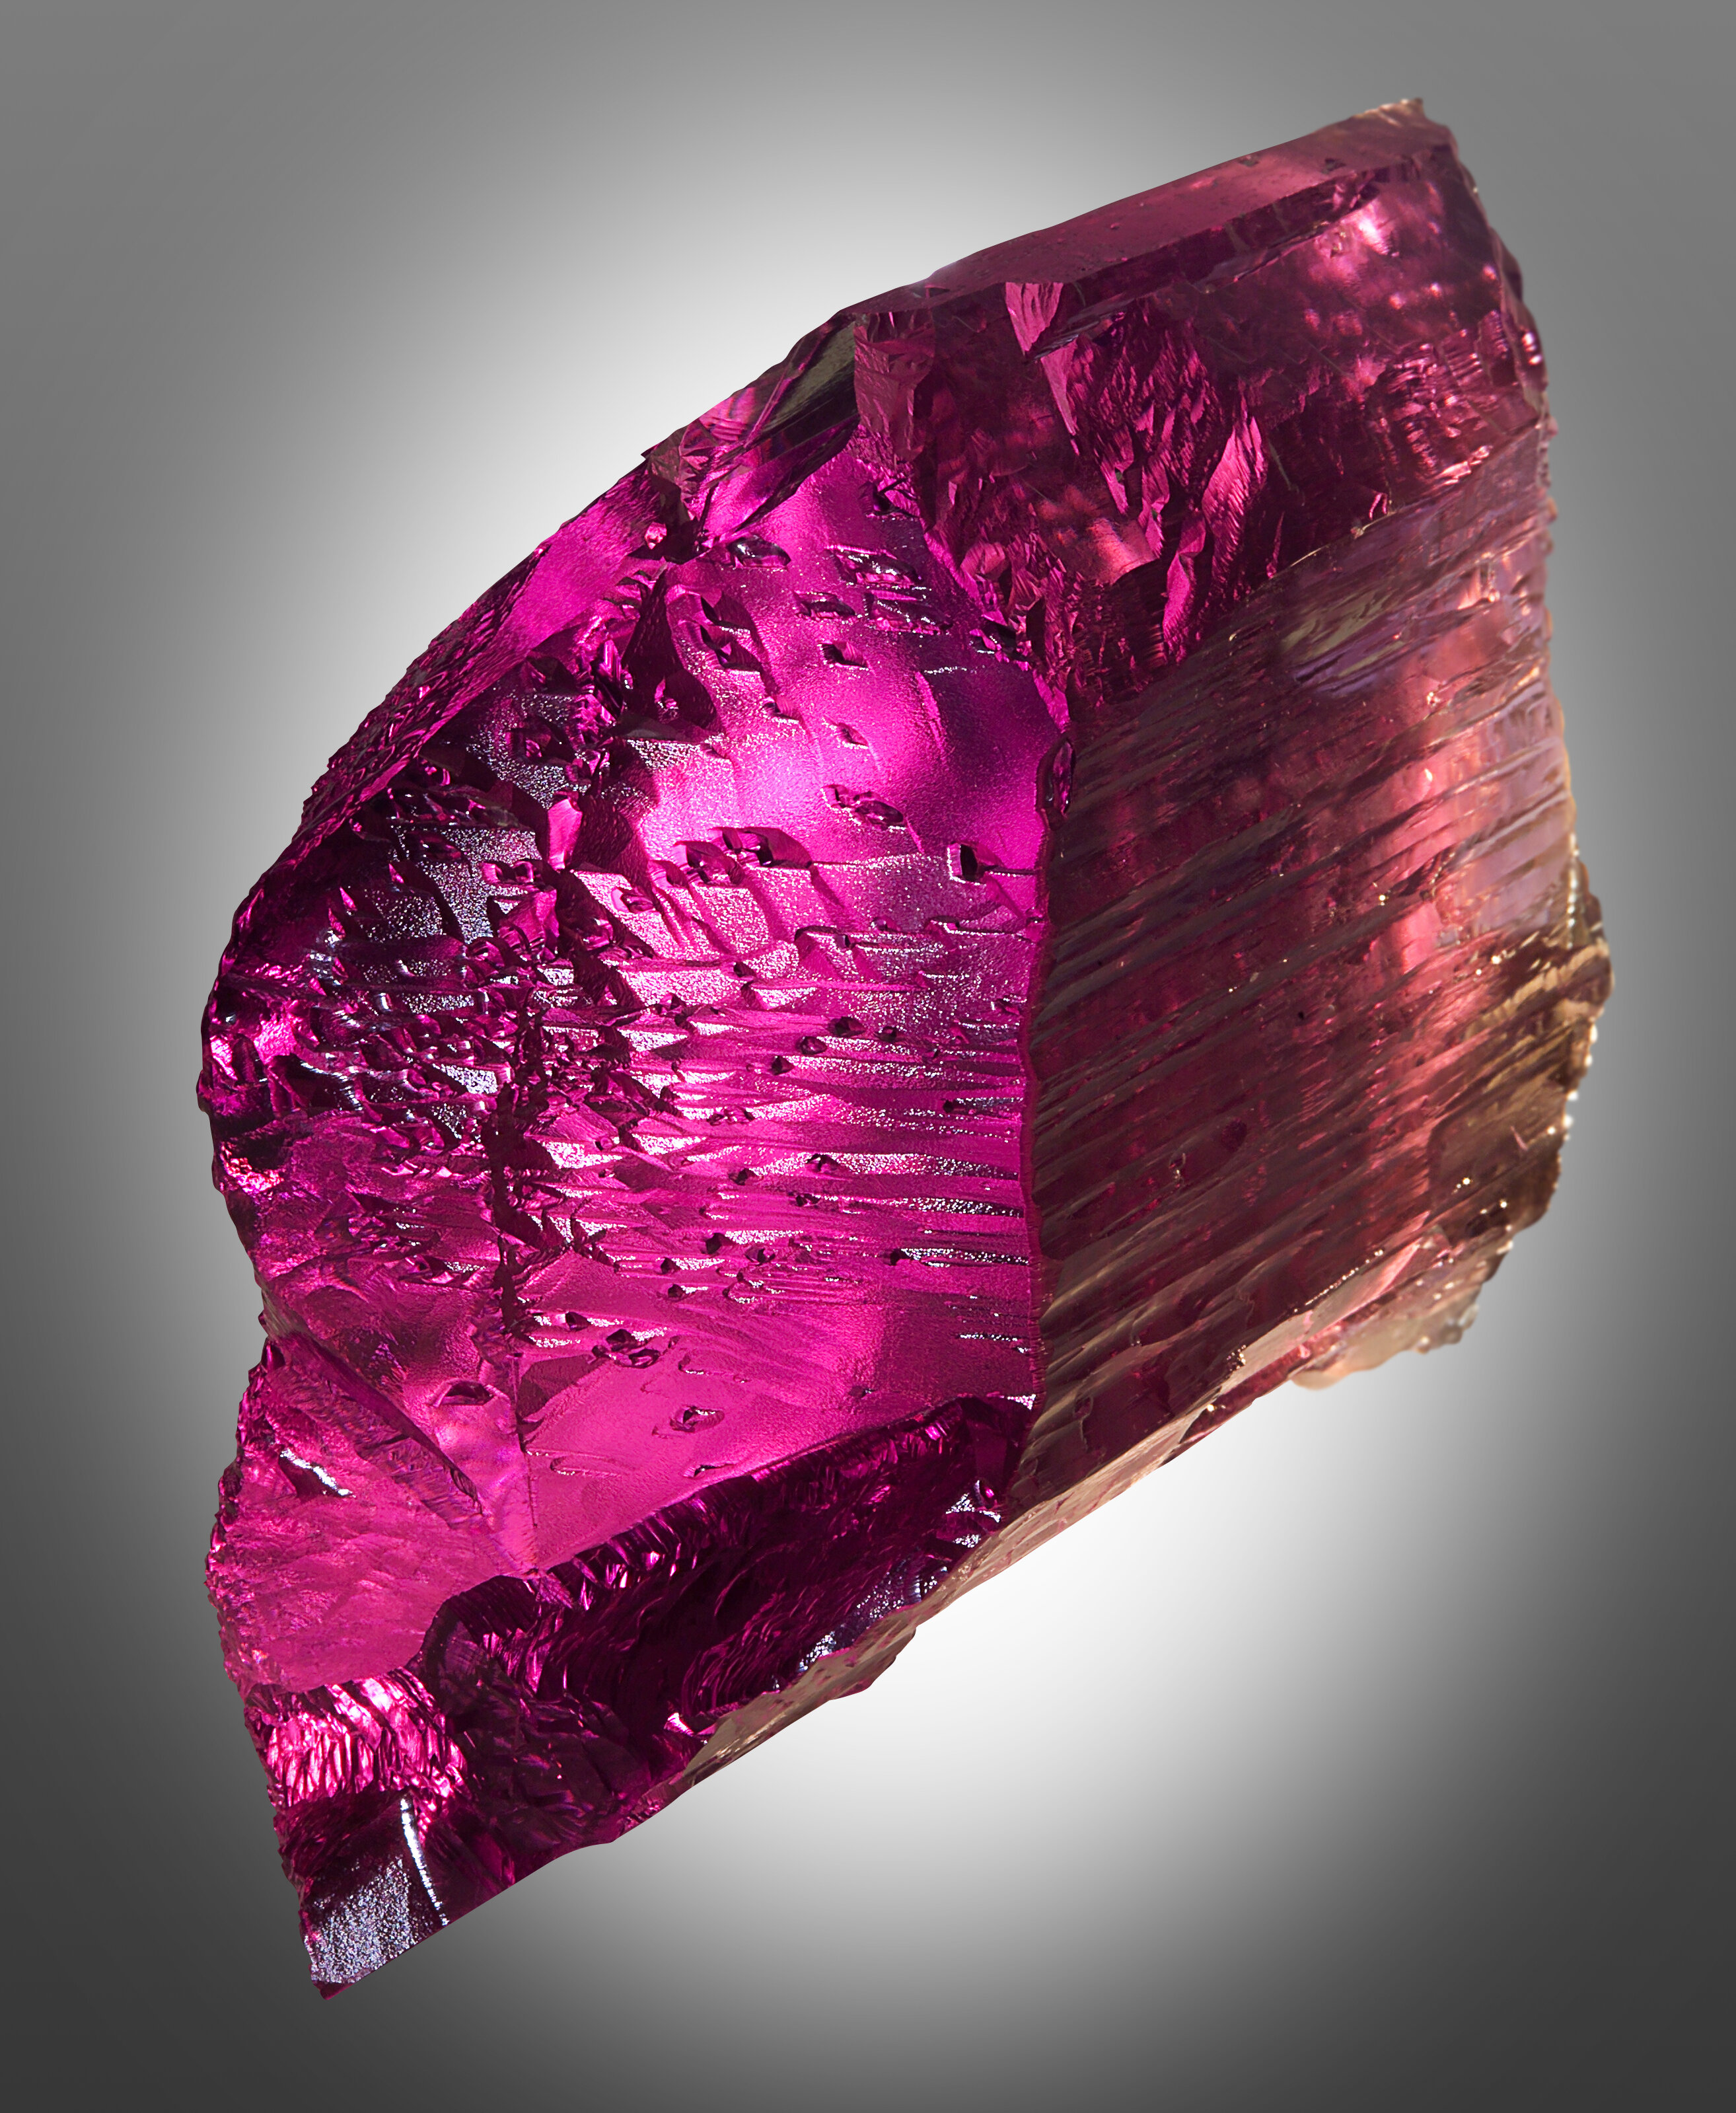 What is the rarest mineral on Earth?